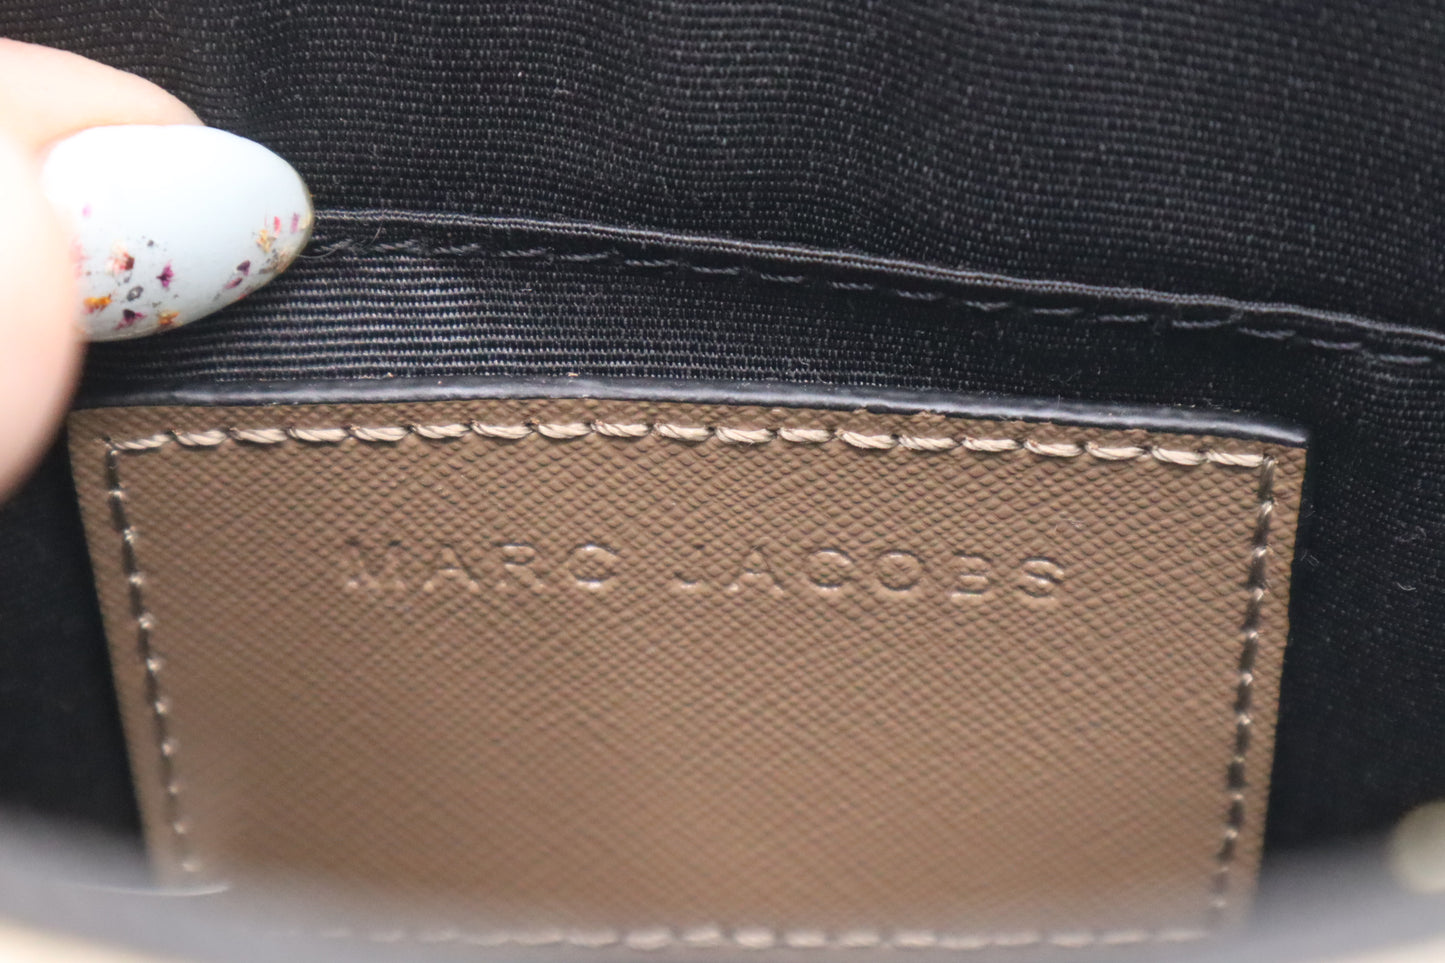 Marc Jacobs Snapshot in Brown & White Leather